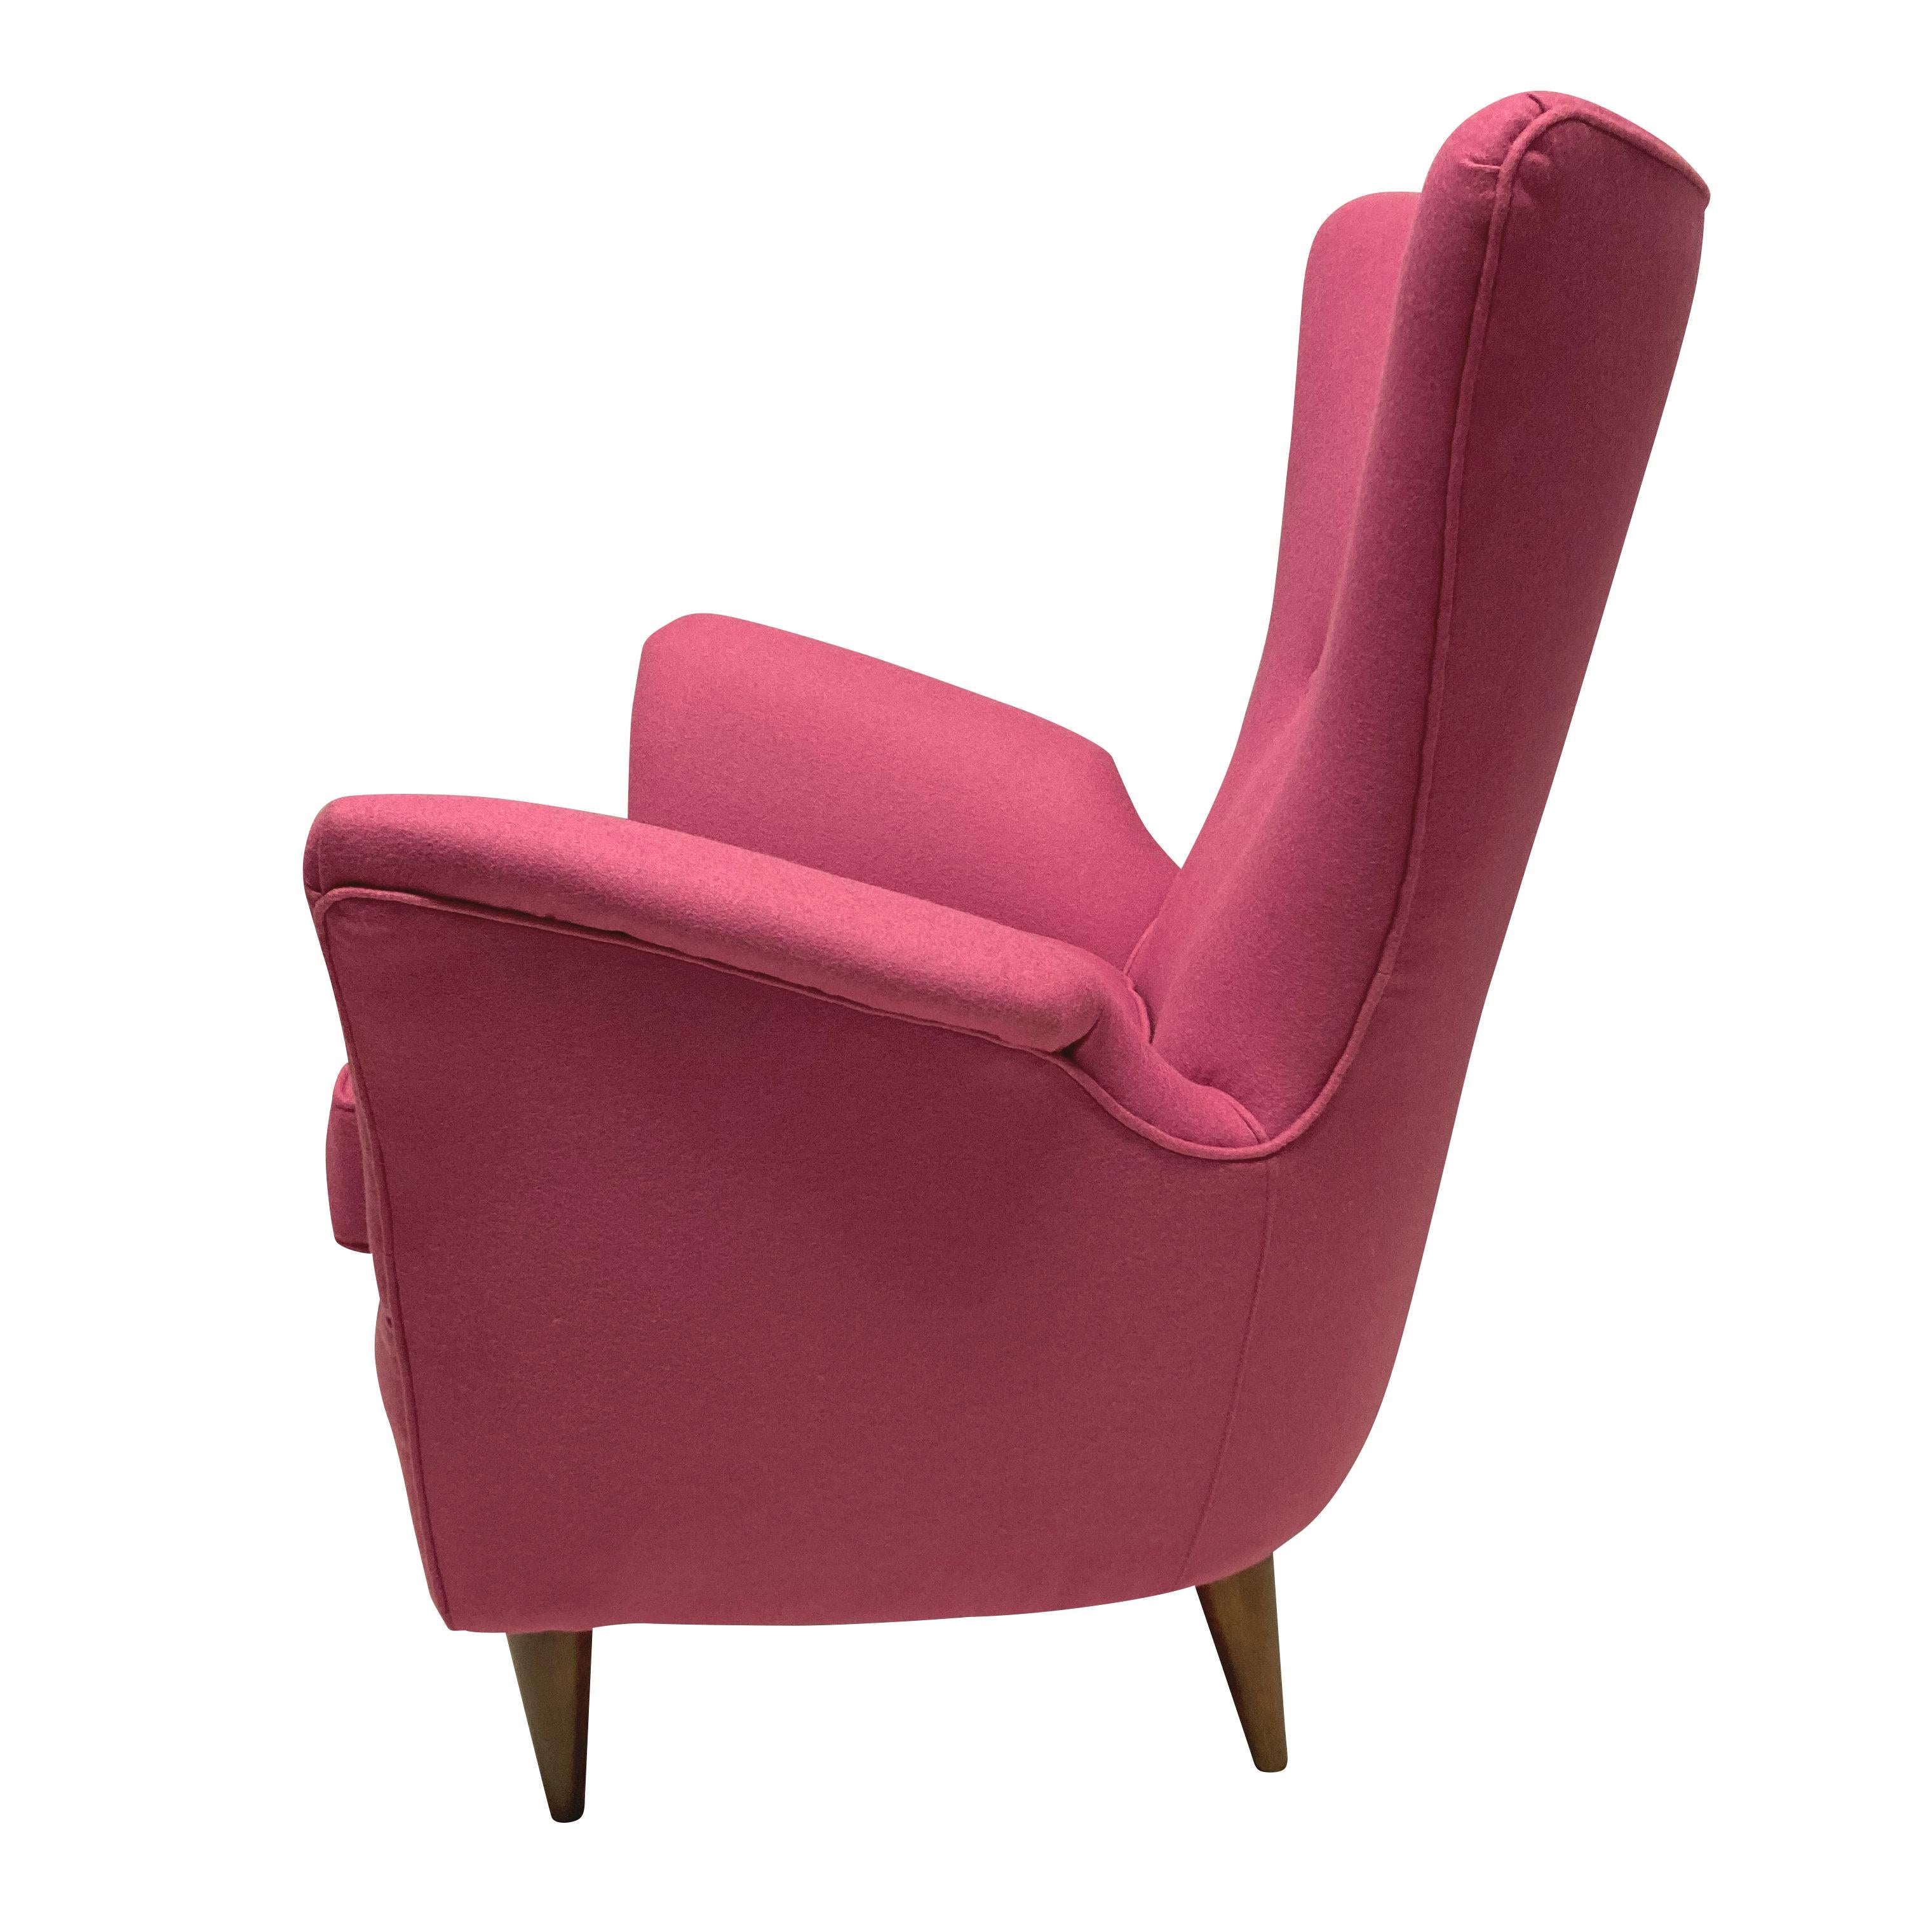 A pair of stylish Italian armchairs by Melchiore Bega. With French polished tapering walnut legs and newly upholstered in pink wool.